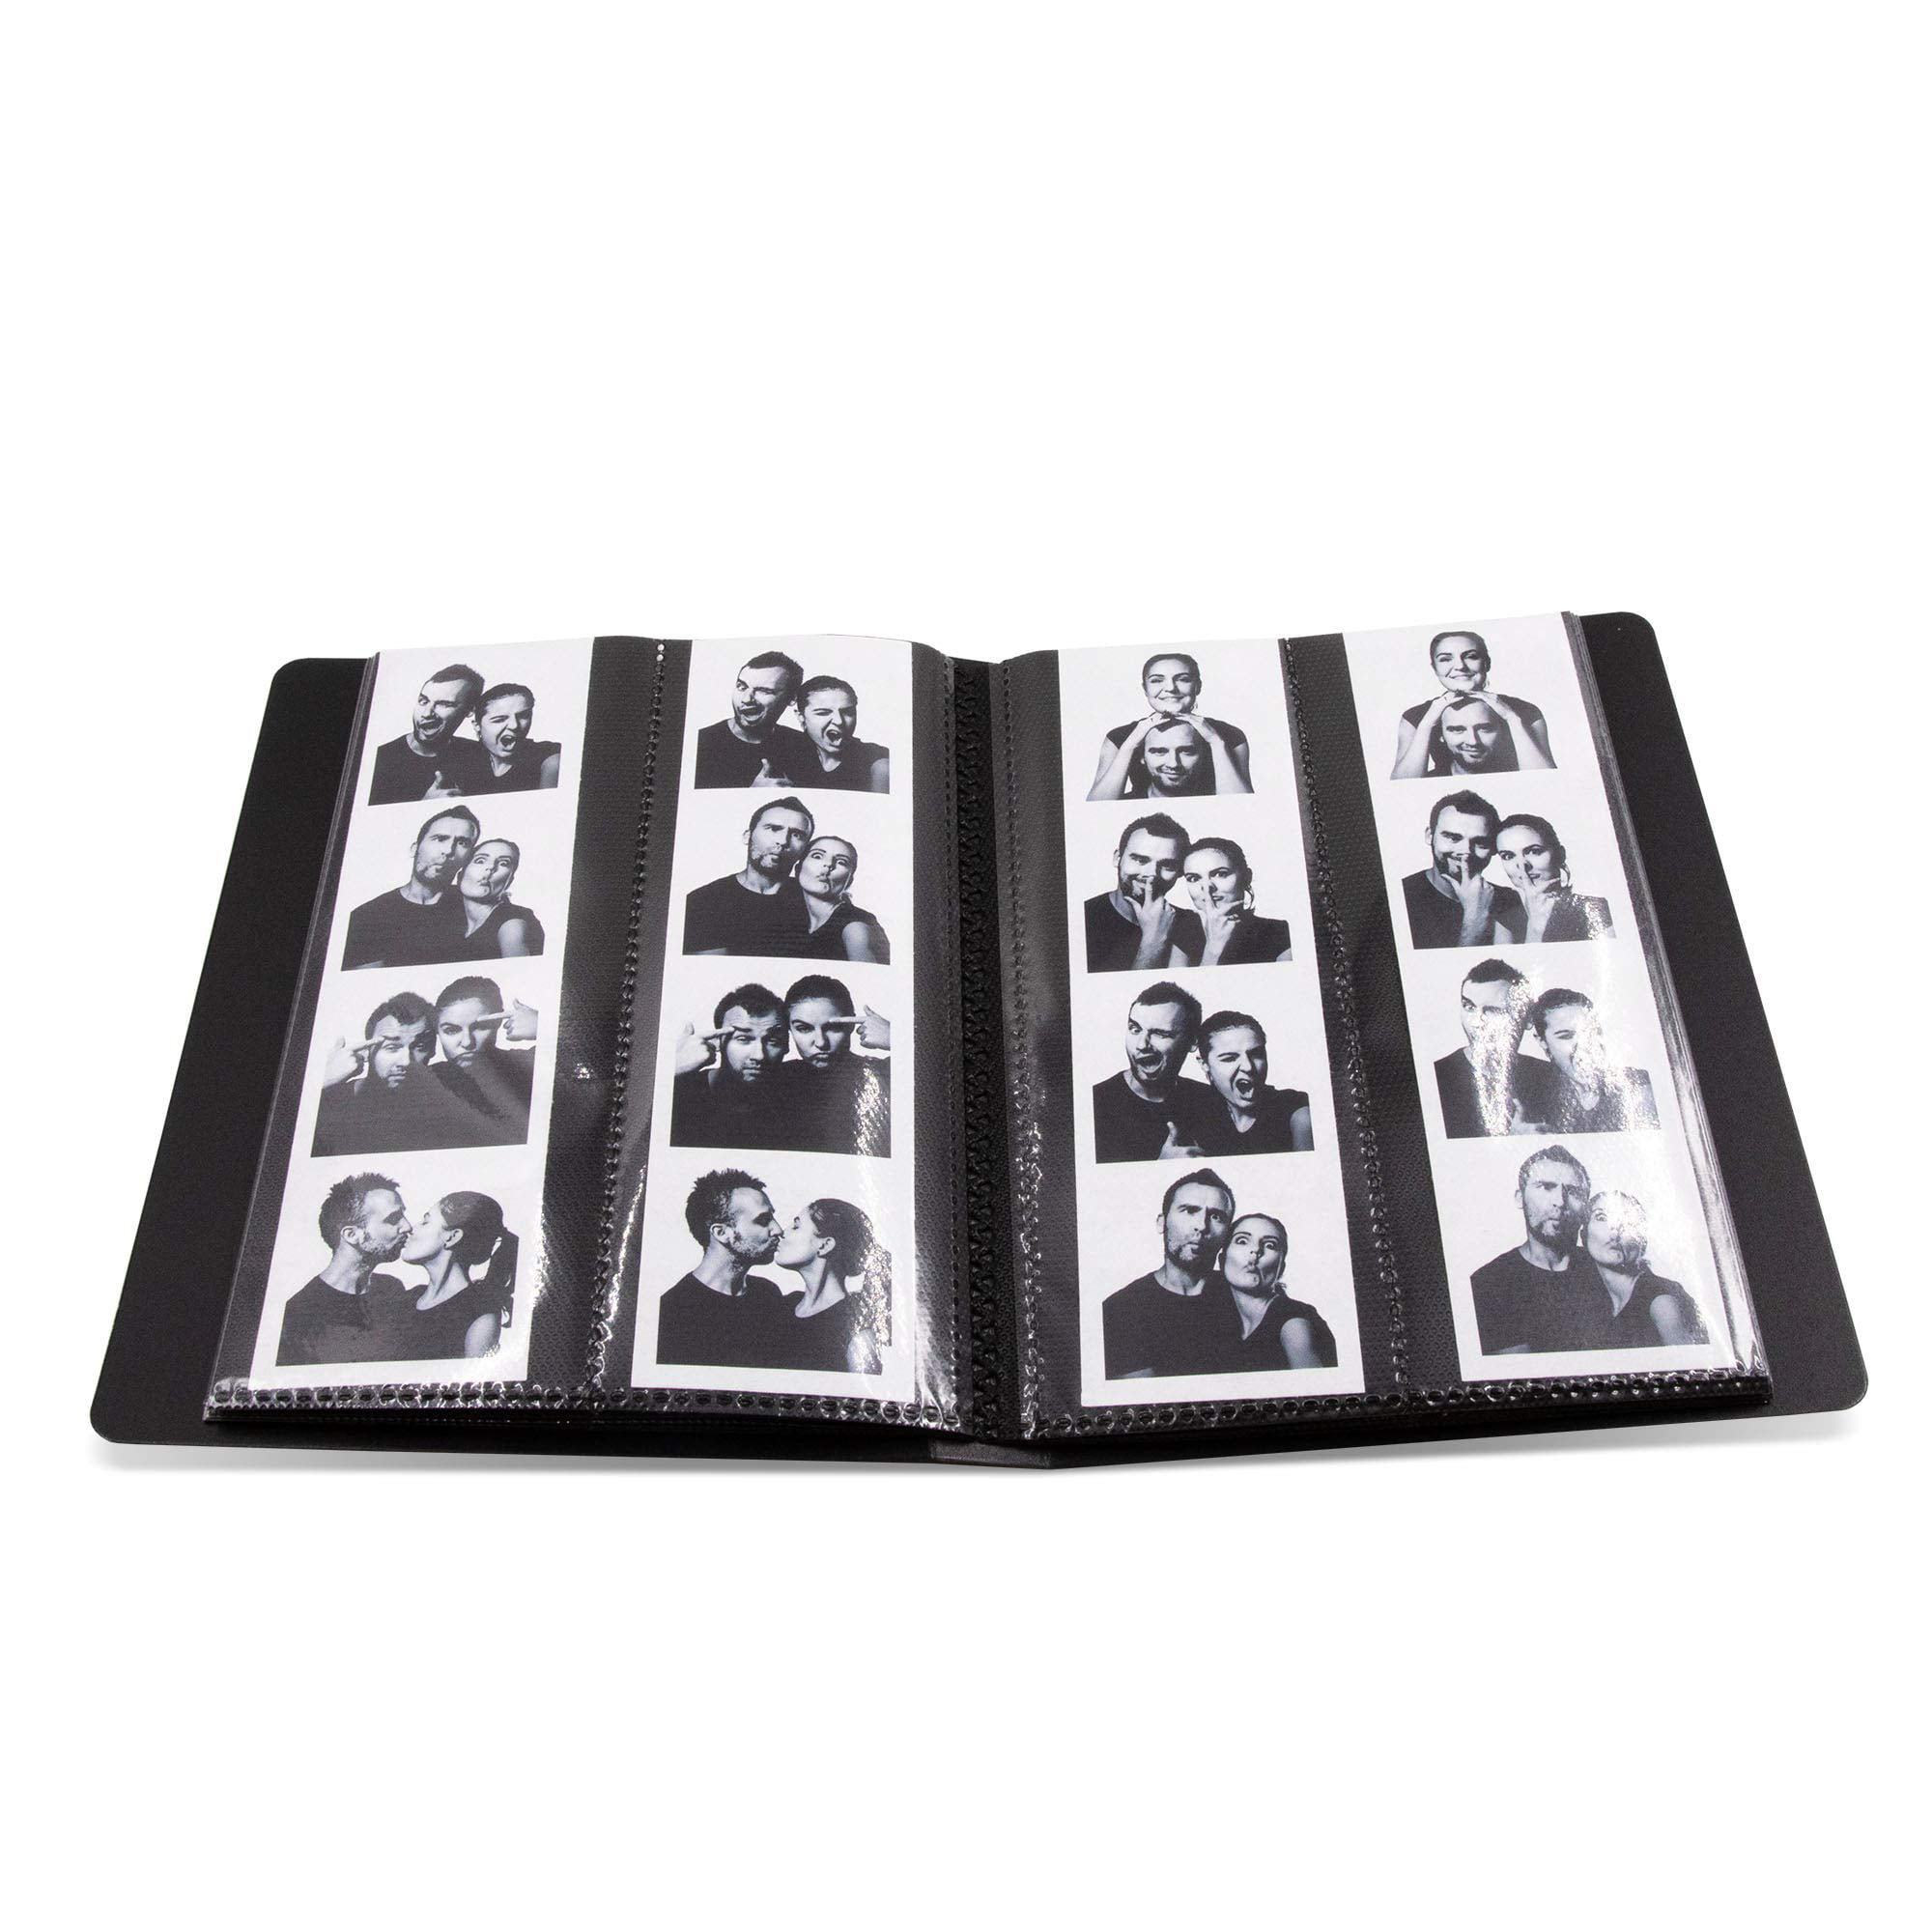 Colorful Photo Booth Frames - Photo Booth Album For 2x6 Inch Photo Strips  Wedding Album 2 x